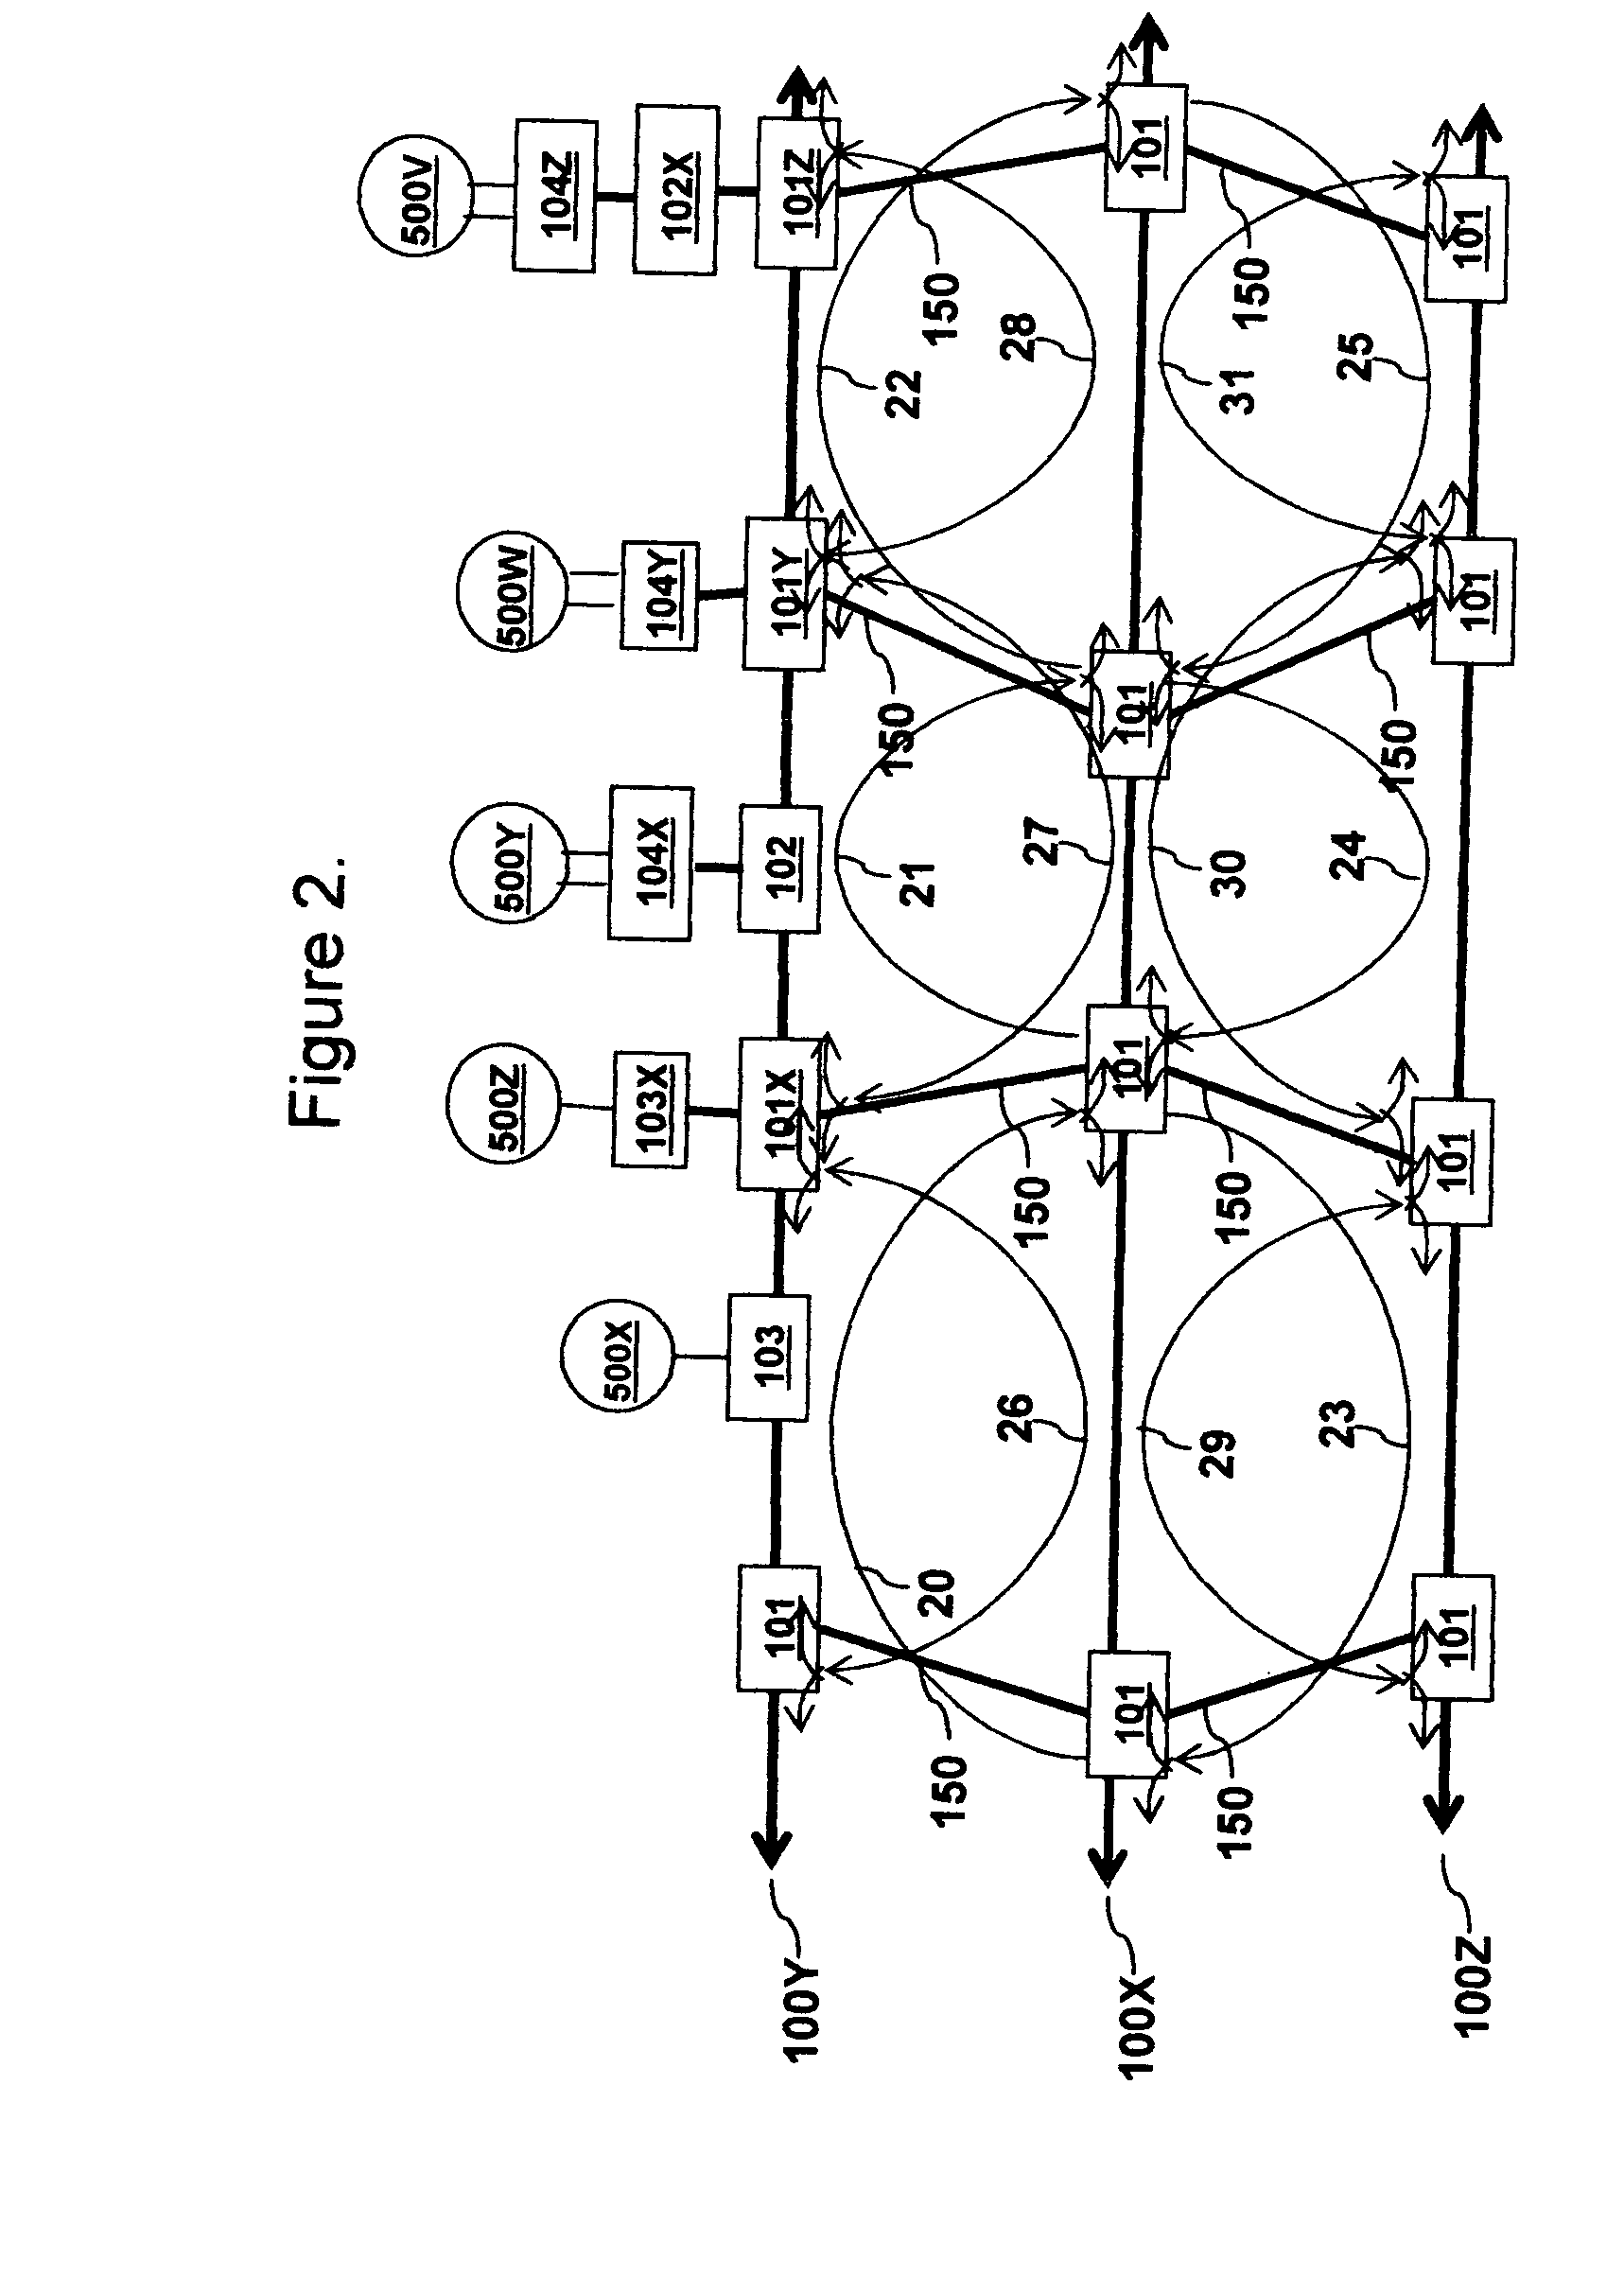 Process of optical WDM bus networking with DWDM expansion for the method of protected point to point, point to multipoint and broadcast connections